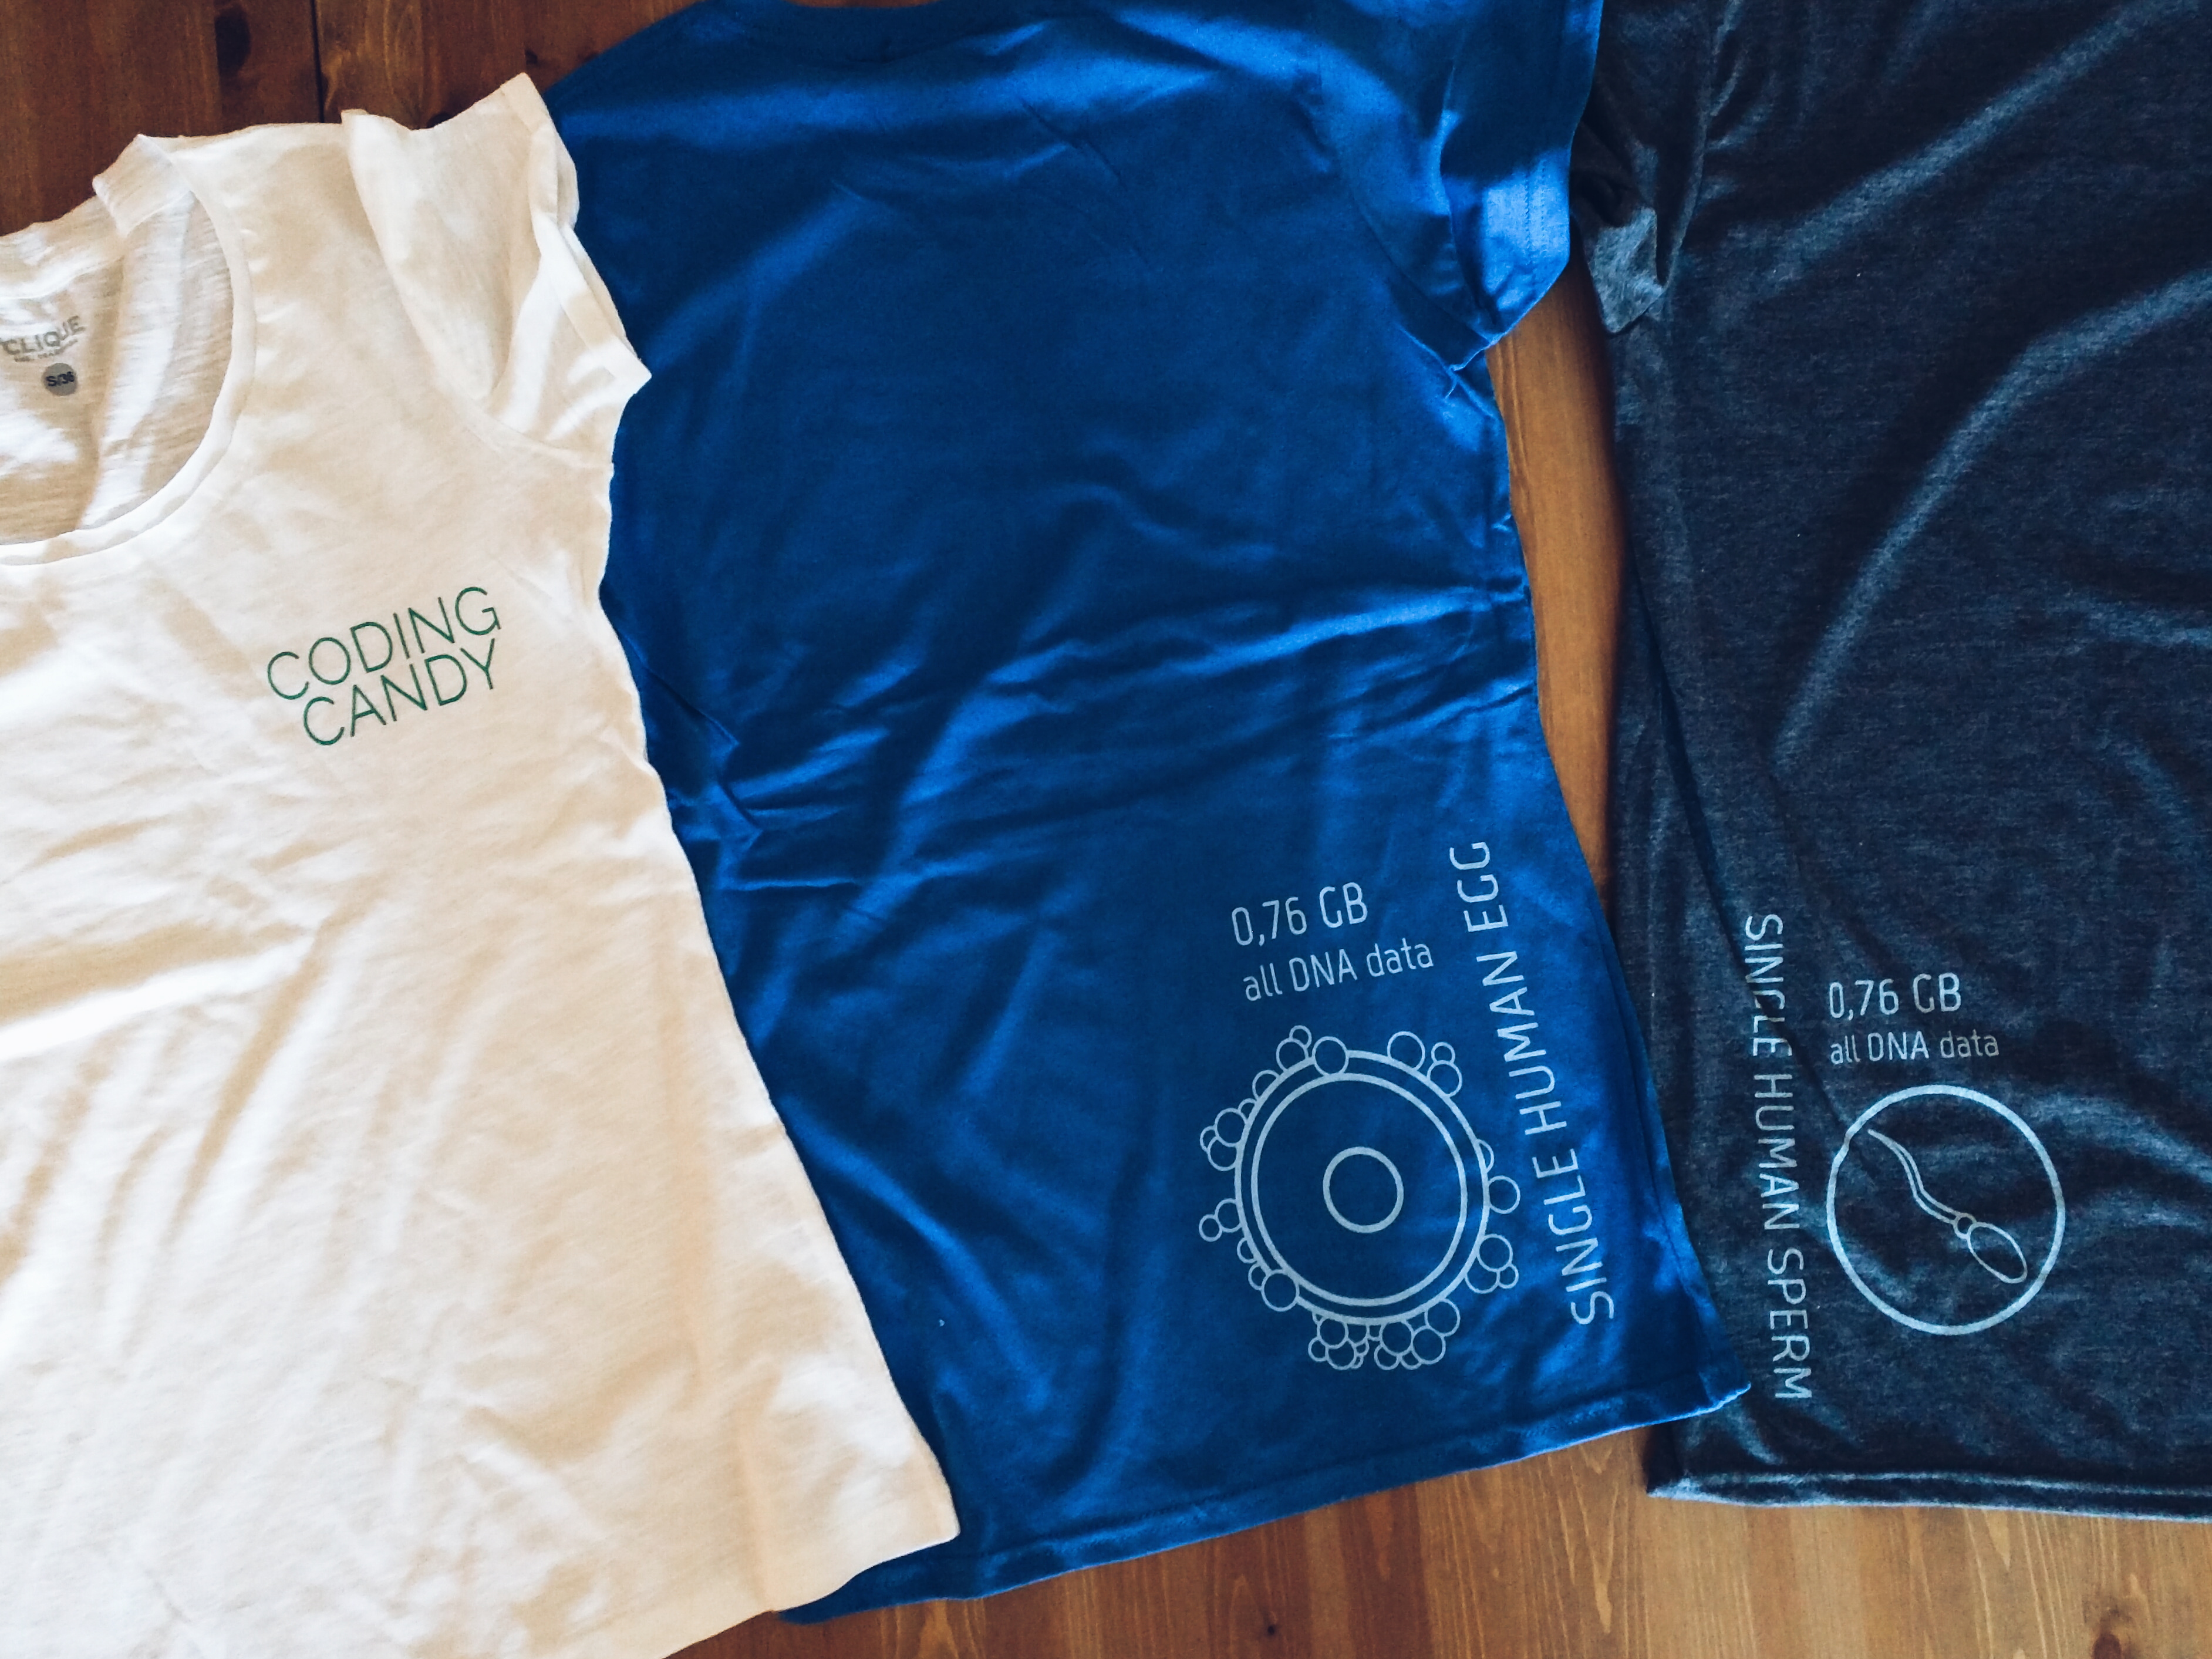 Official Coding Candy t-shirts designed by Eu